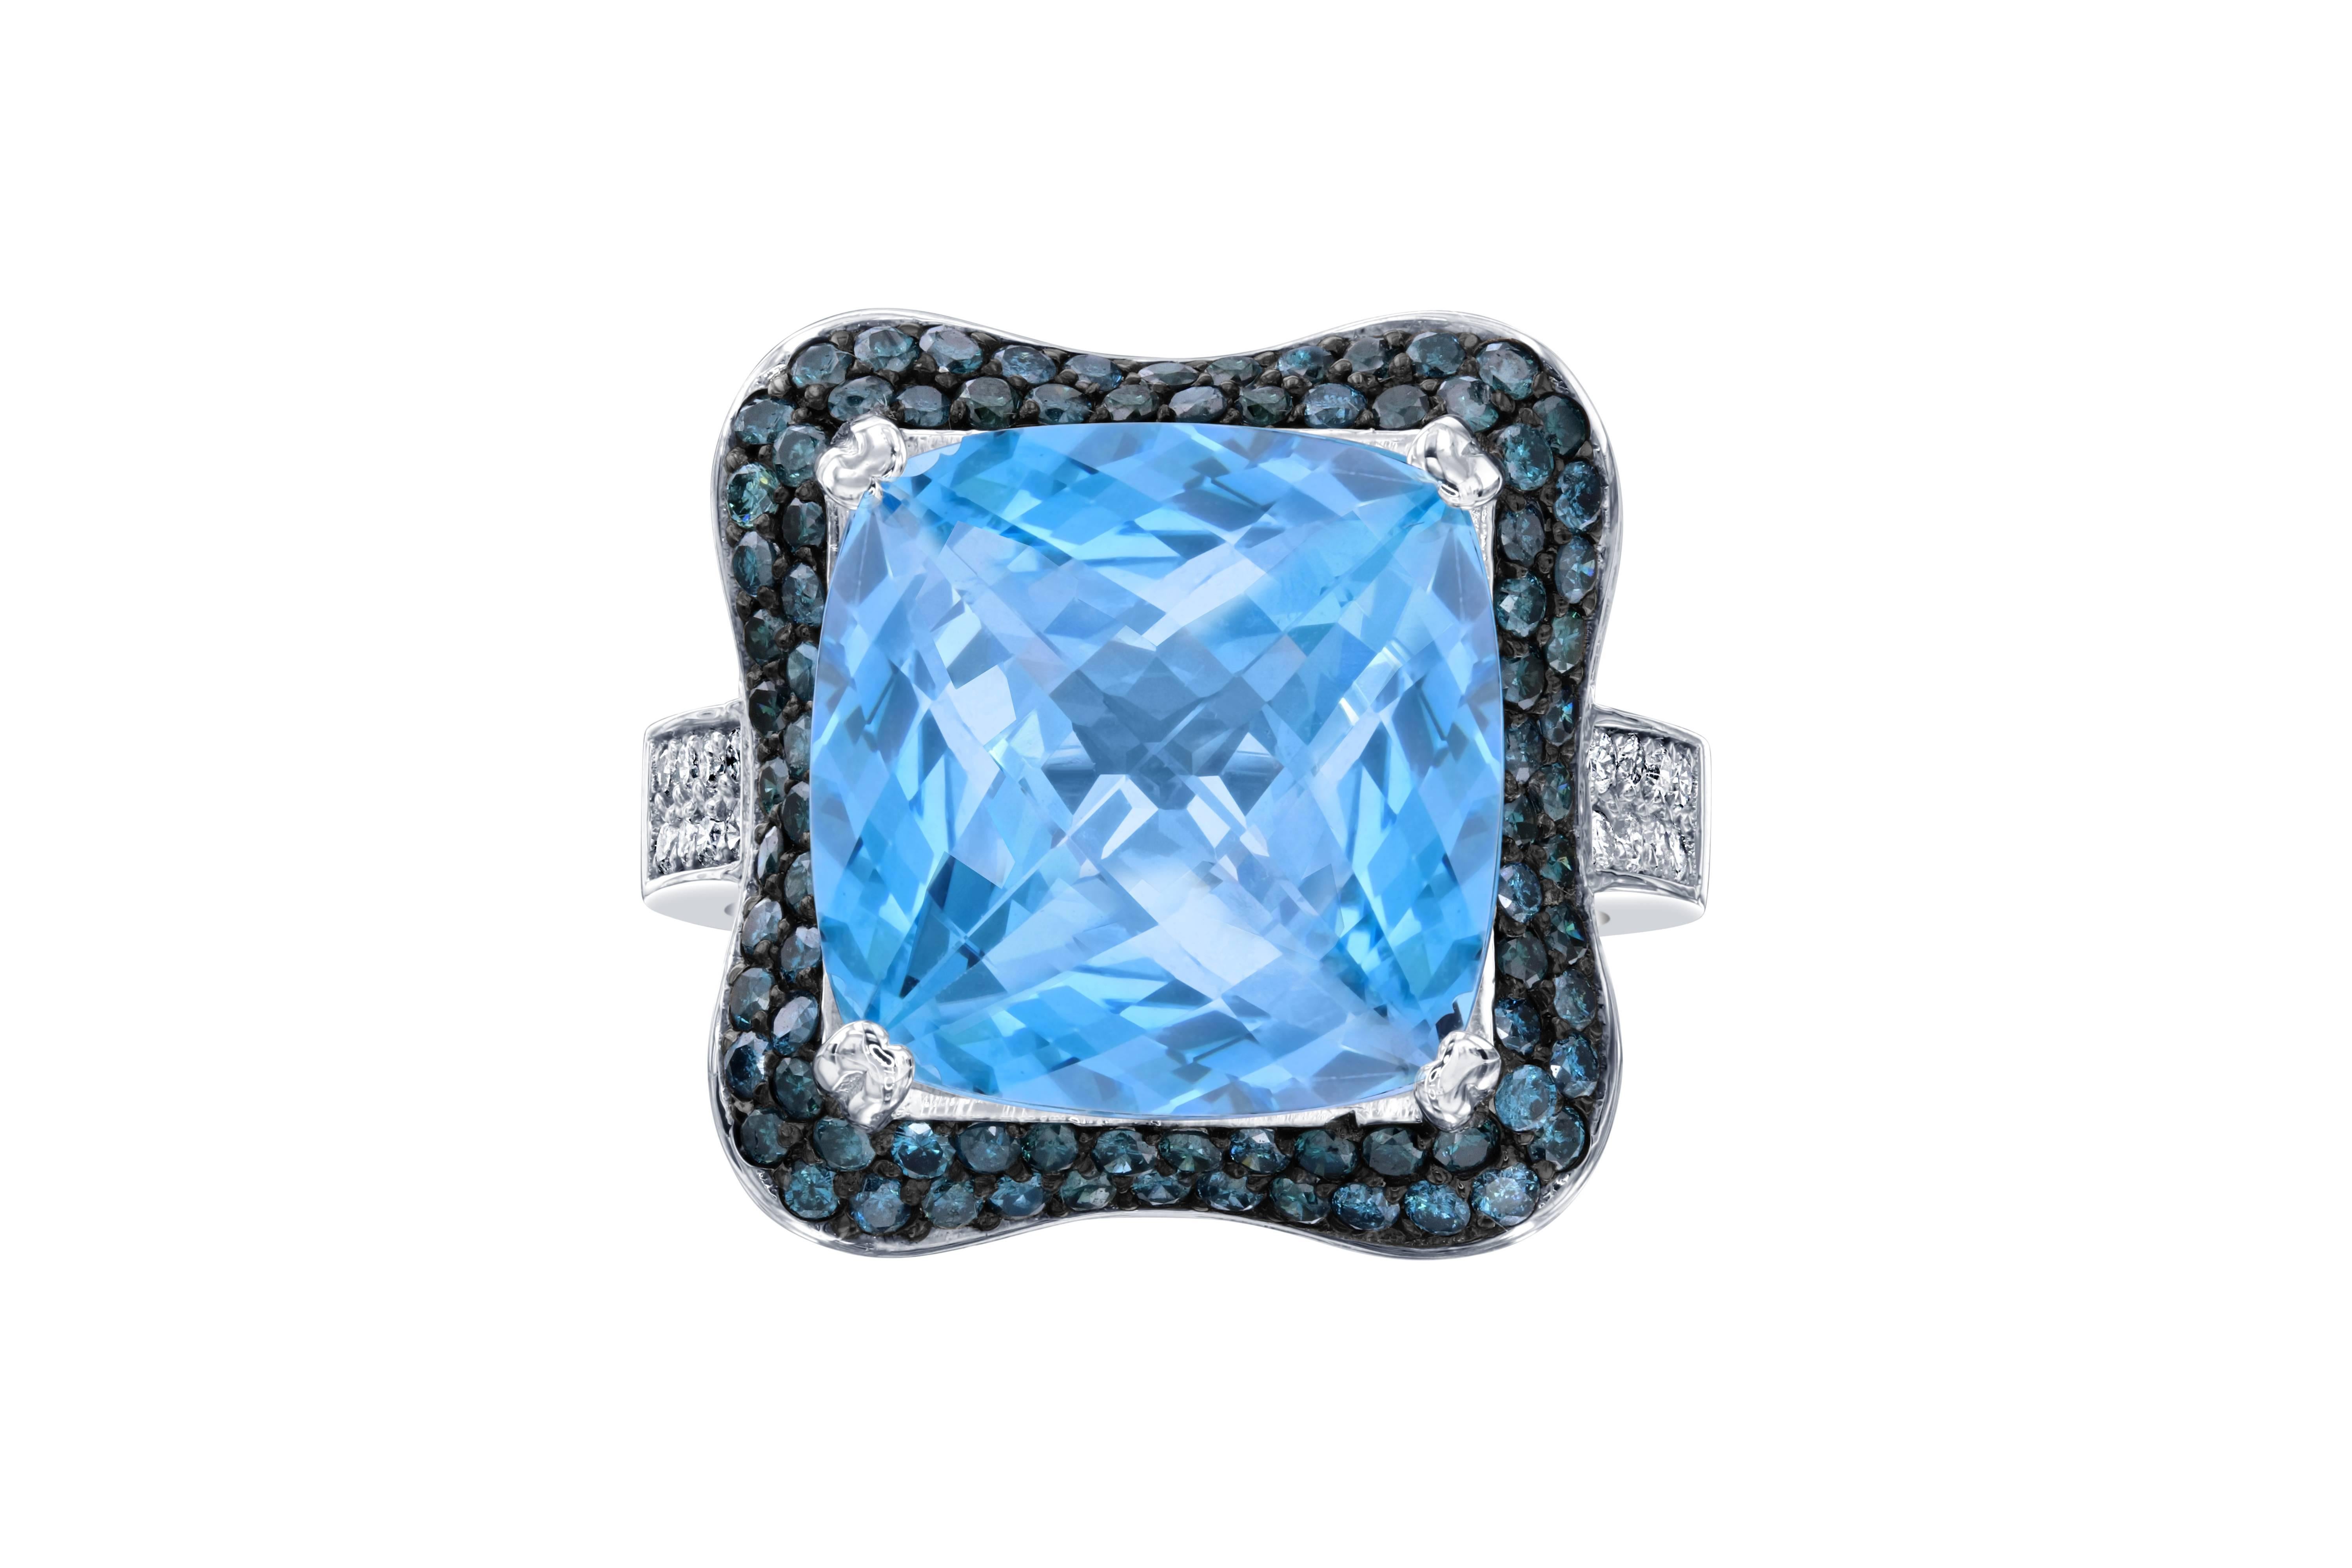 A true statement piece!  This stunning ring has a huge square cut Blue Topaz that weighs 12.35 carats and is surrounded by 84 Blue Round Cut Diamonds that weigh 1.01 carats.  The Blue Diamonds and natural and genuine diamonds that are color treated